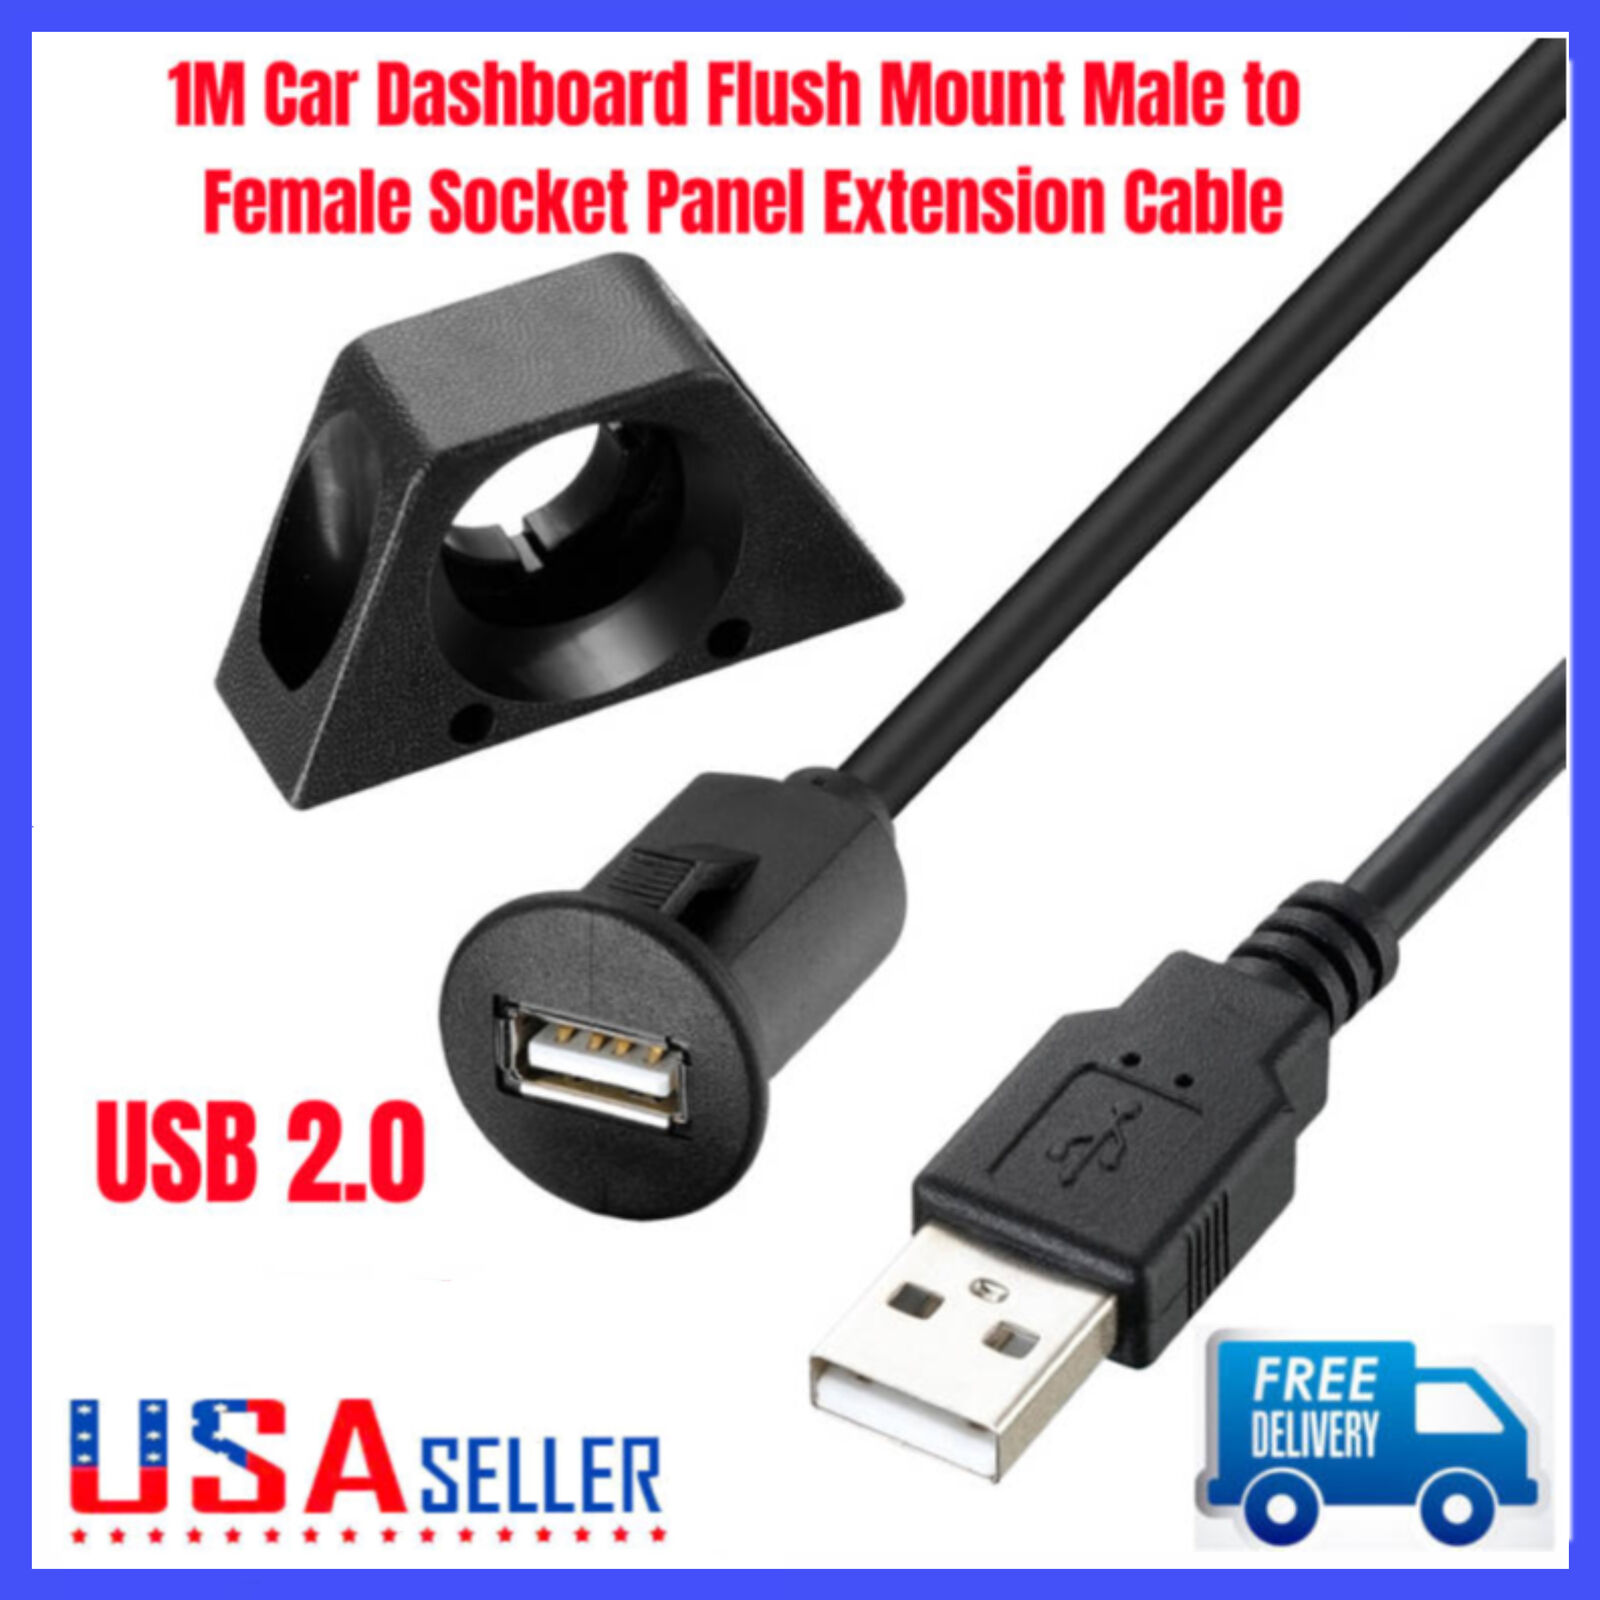 1M Car Dashboard Flush Mount USB 2.0 Male to Female Socket Panel Extension Cable